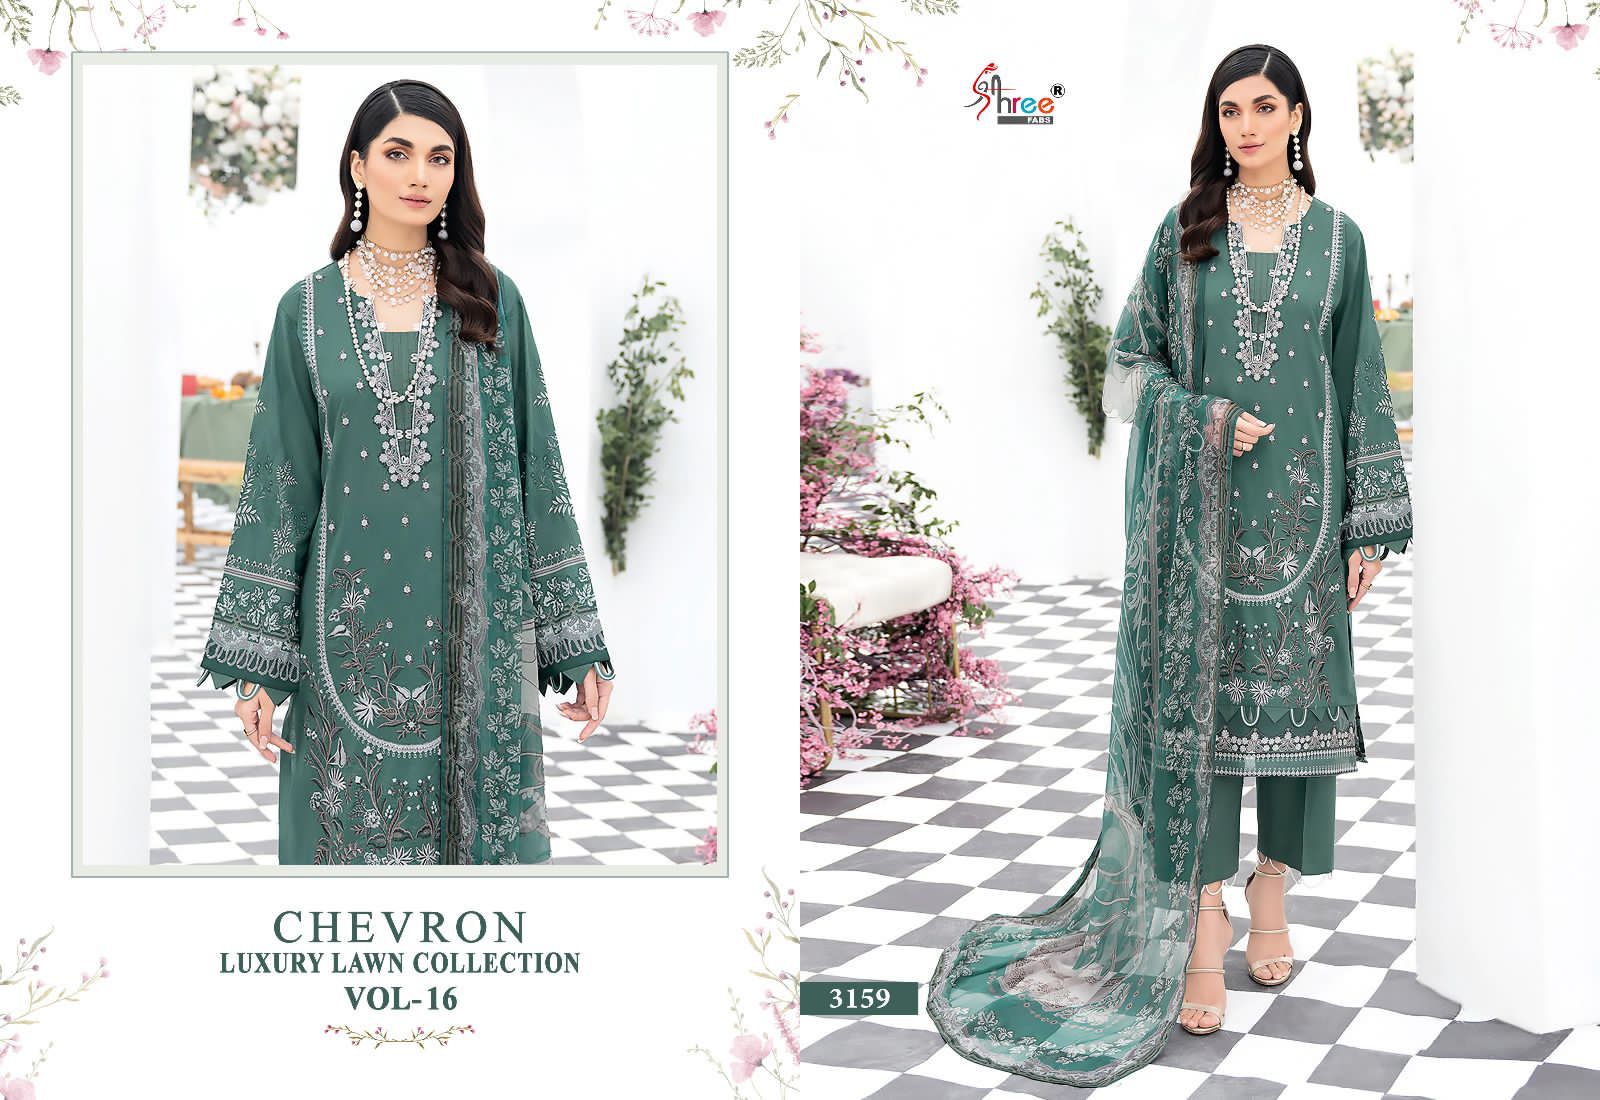 Shree Chevron Luxury Lawn Collection Vol 16 collection 9